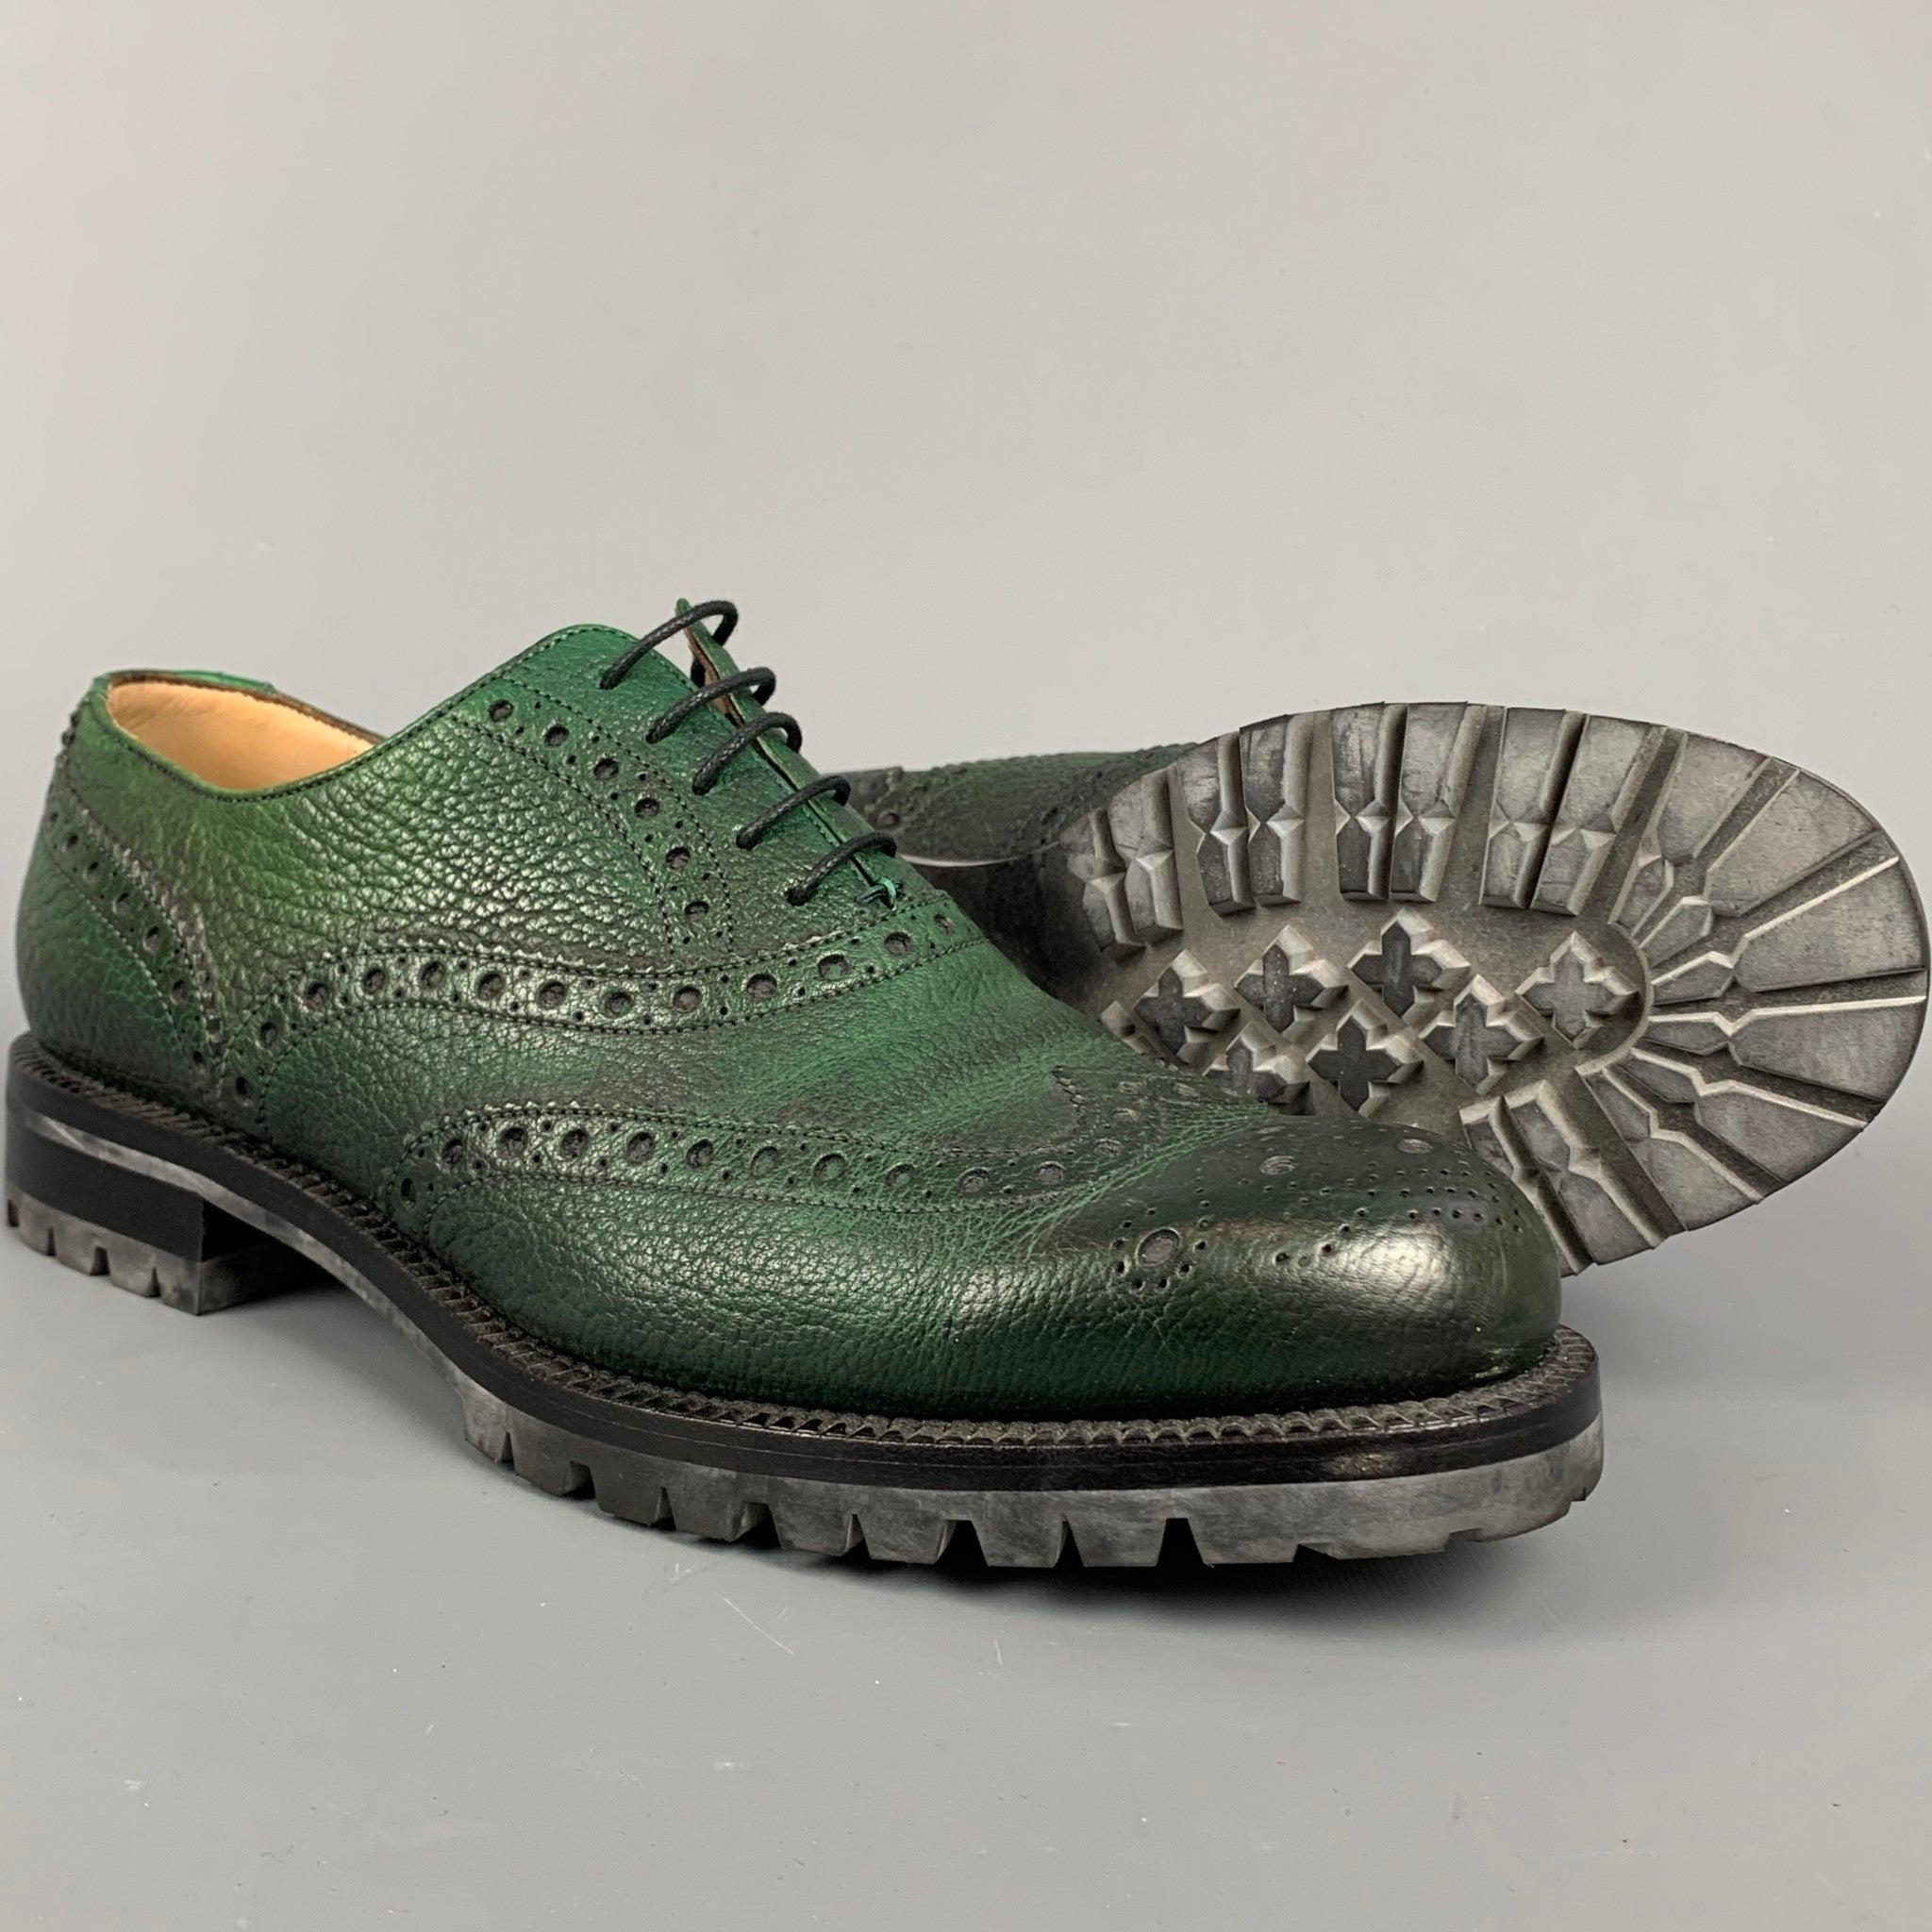 Black BALLY Bindy Size 10 Green Perforated Leather Wingtip Lace Up Shoes